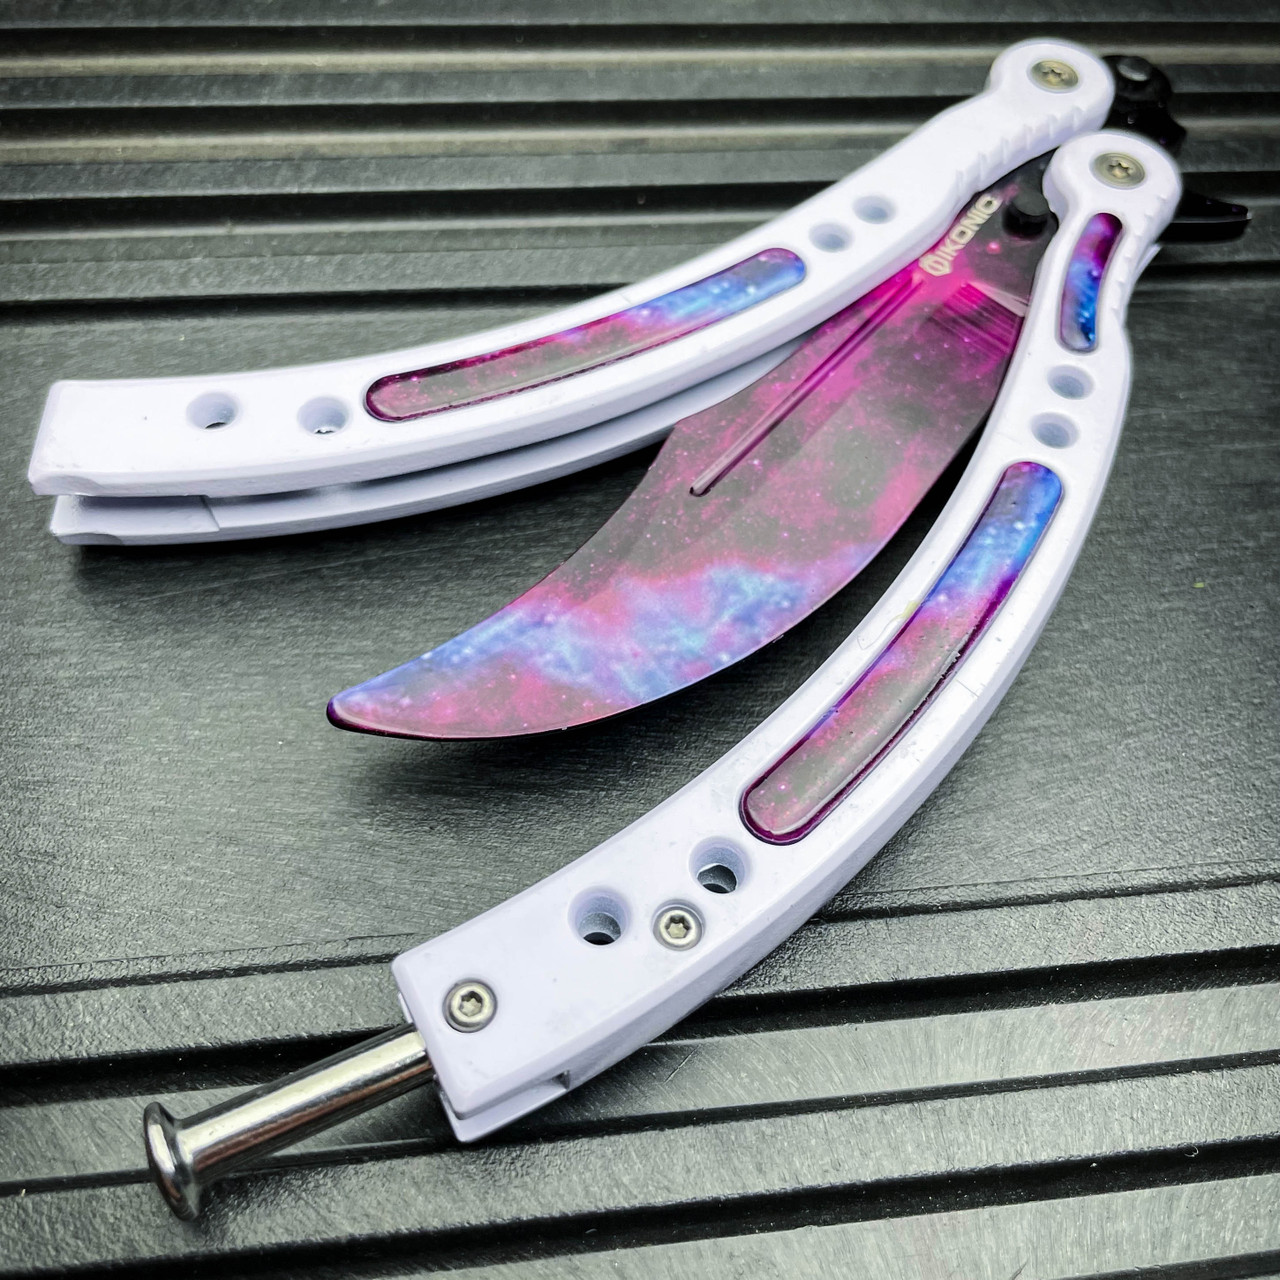 3PC CSGO TACTICAL FIXED BLADE KARAMBIT BUTTERFLY BALISONG TRAINER BAYONET KNIFE  SET - GALAXY WHITE